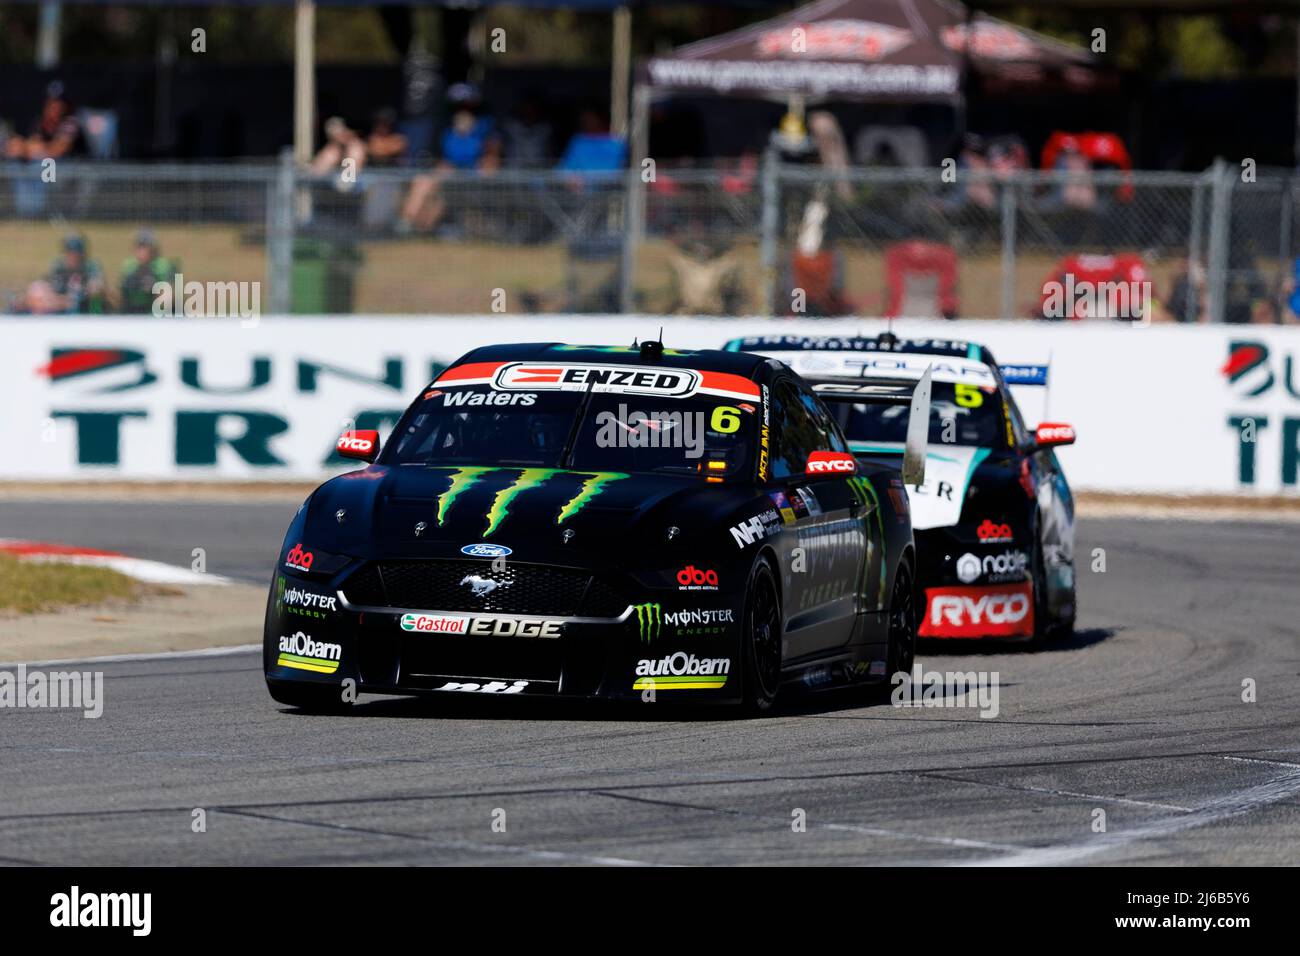 Perth, Australia. 30th Apr, 2022. 30th April 2022: Wanneroo Raceway, Perth, Western  Australia; 2022 Bunnings Trade Perth Supecars motor racing: Number 6  Monster Energy Racing car driven by Cam Waters during practice